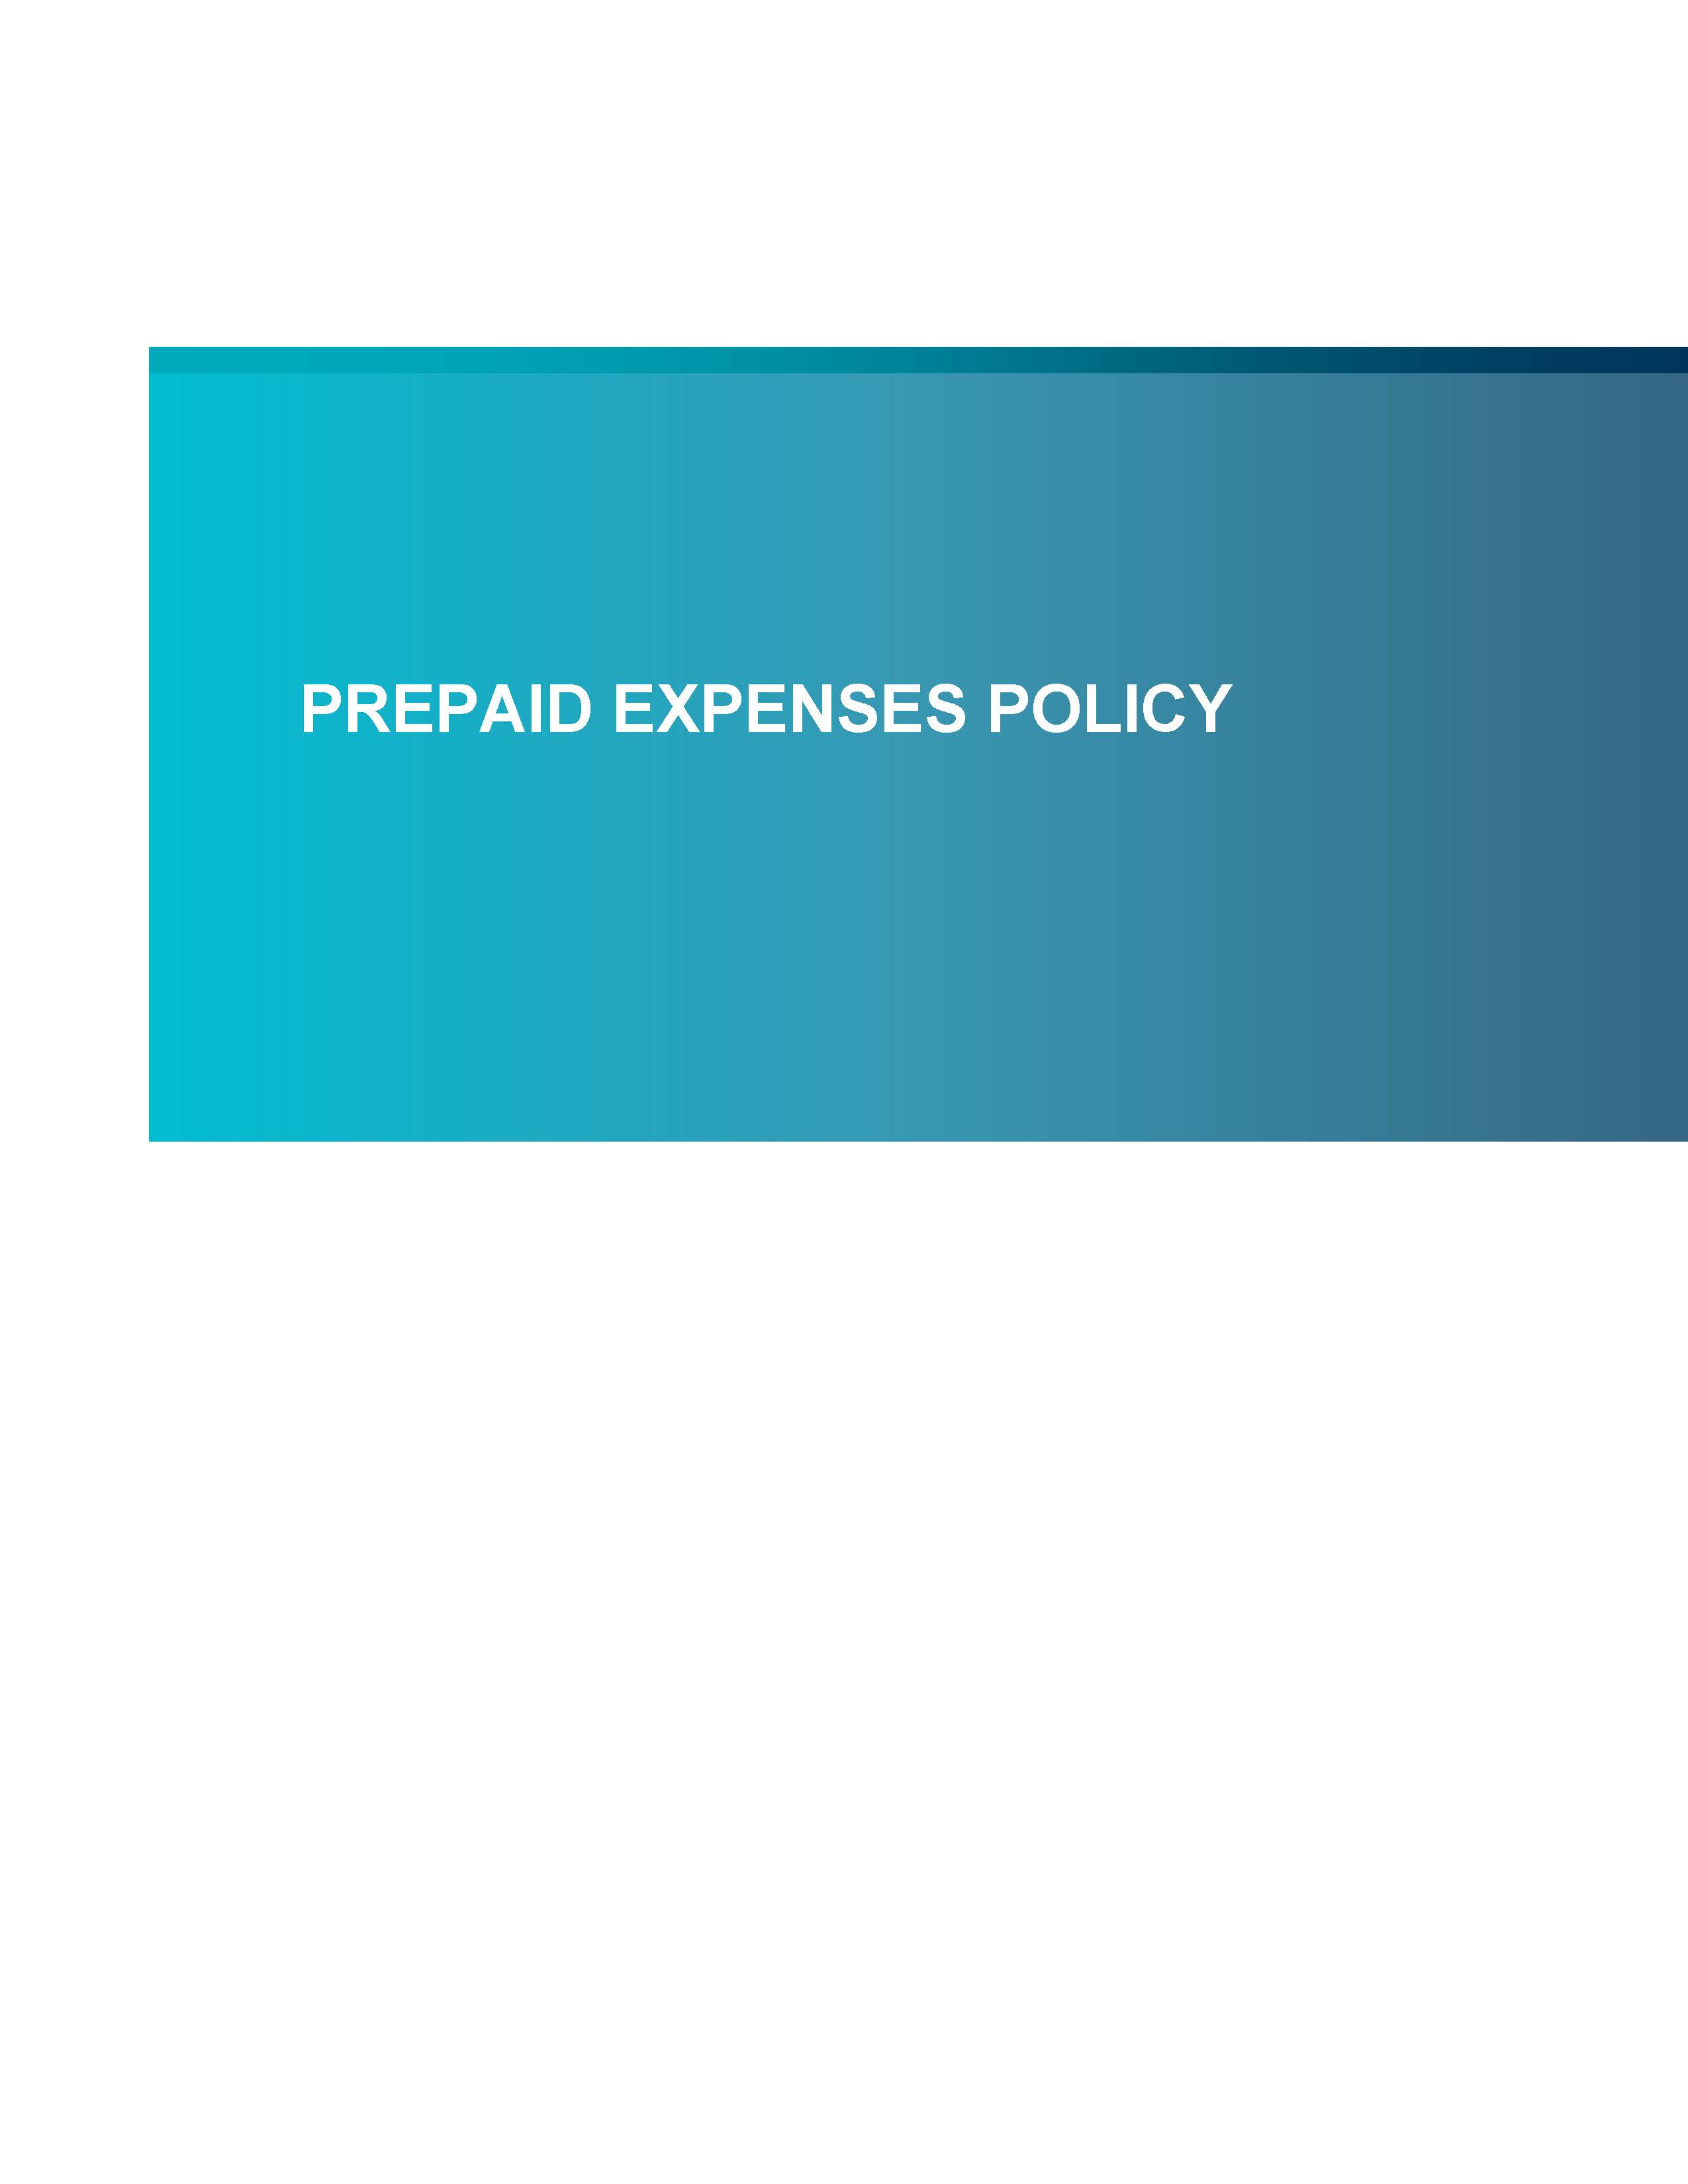 Screenshot of the first page of Prepaid Expenses Policy